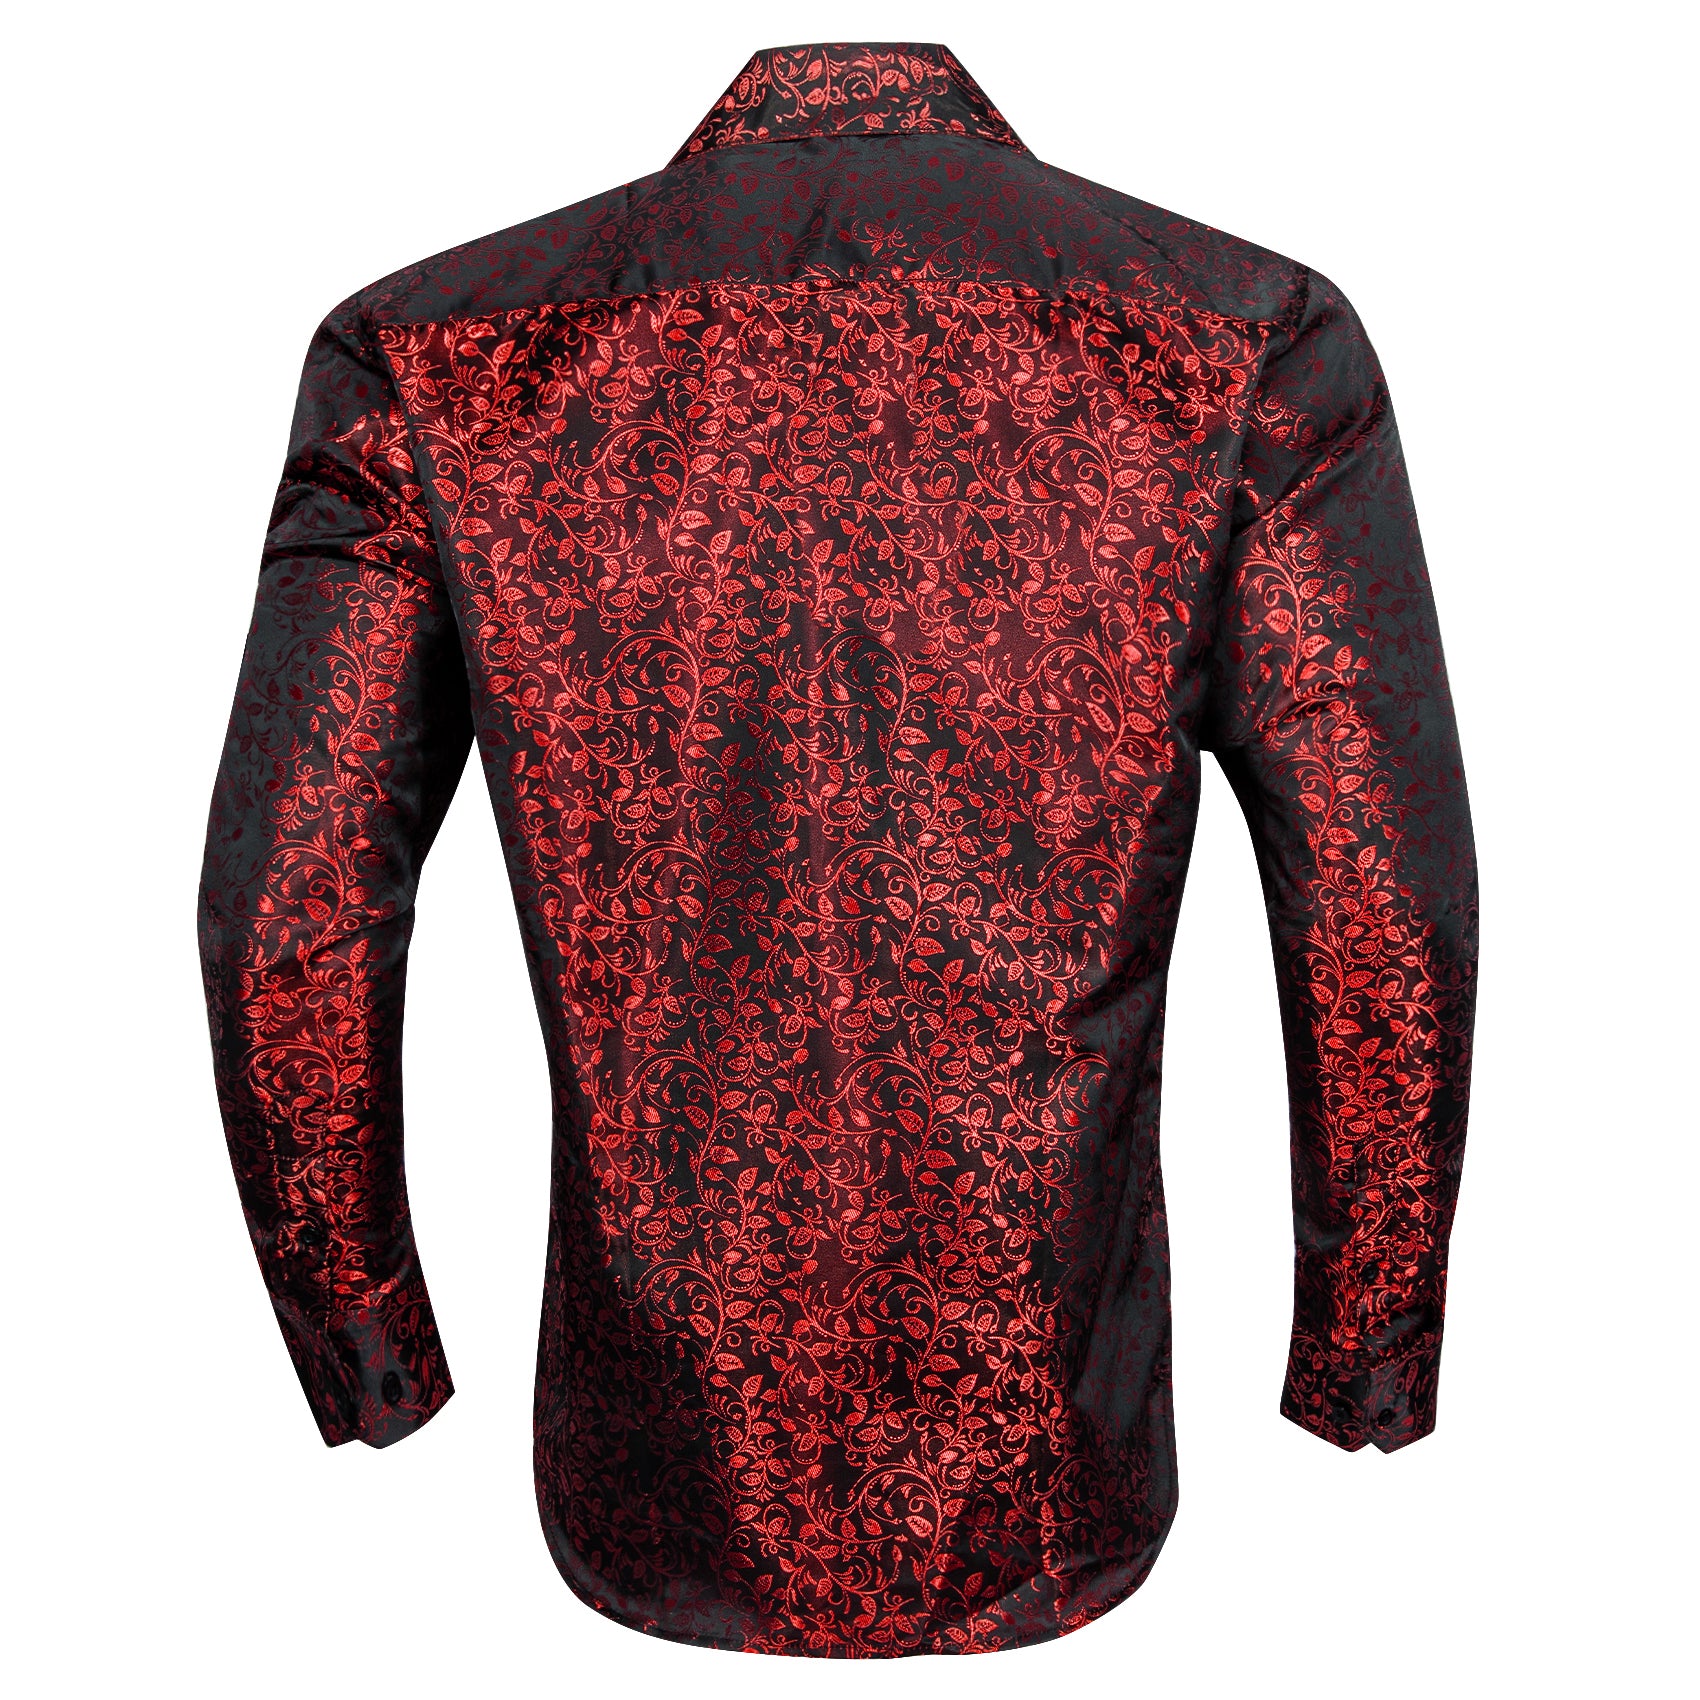 Barry.wang Luxury Burgundy Red Leaves Floral Silk Shirt